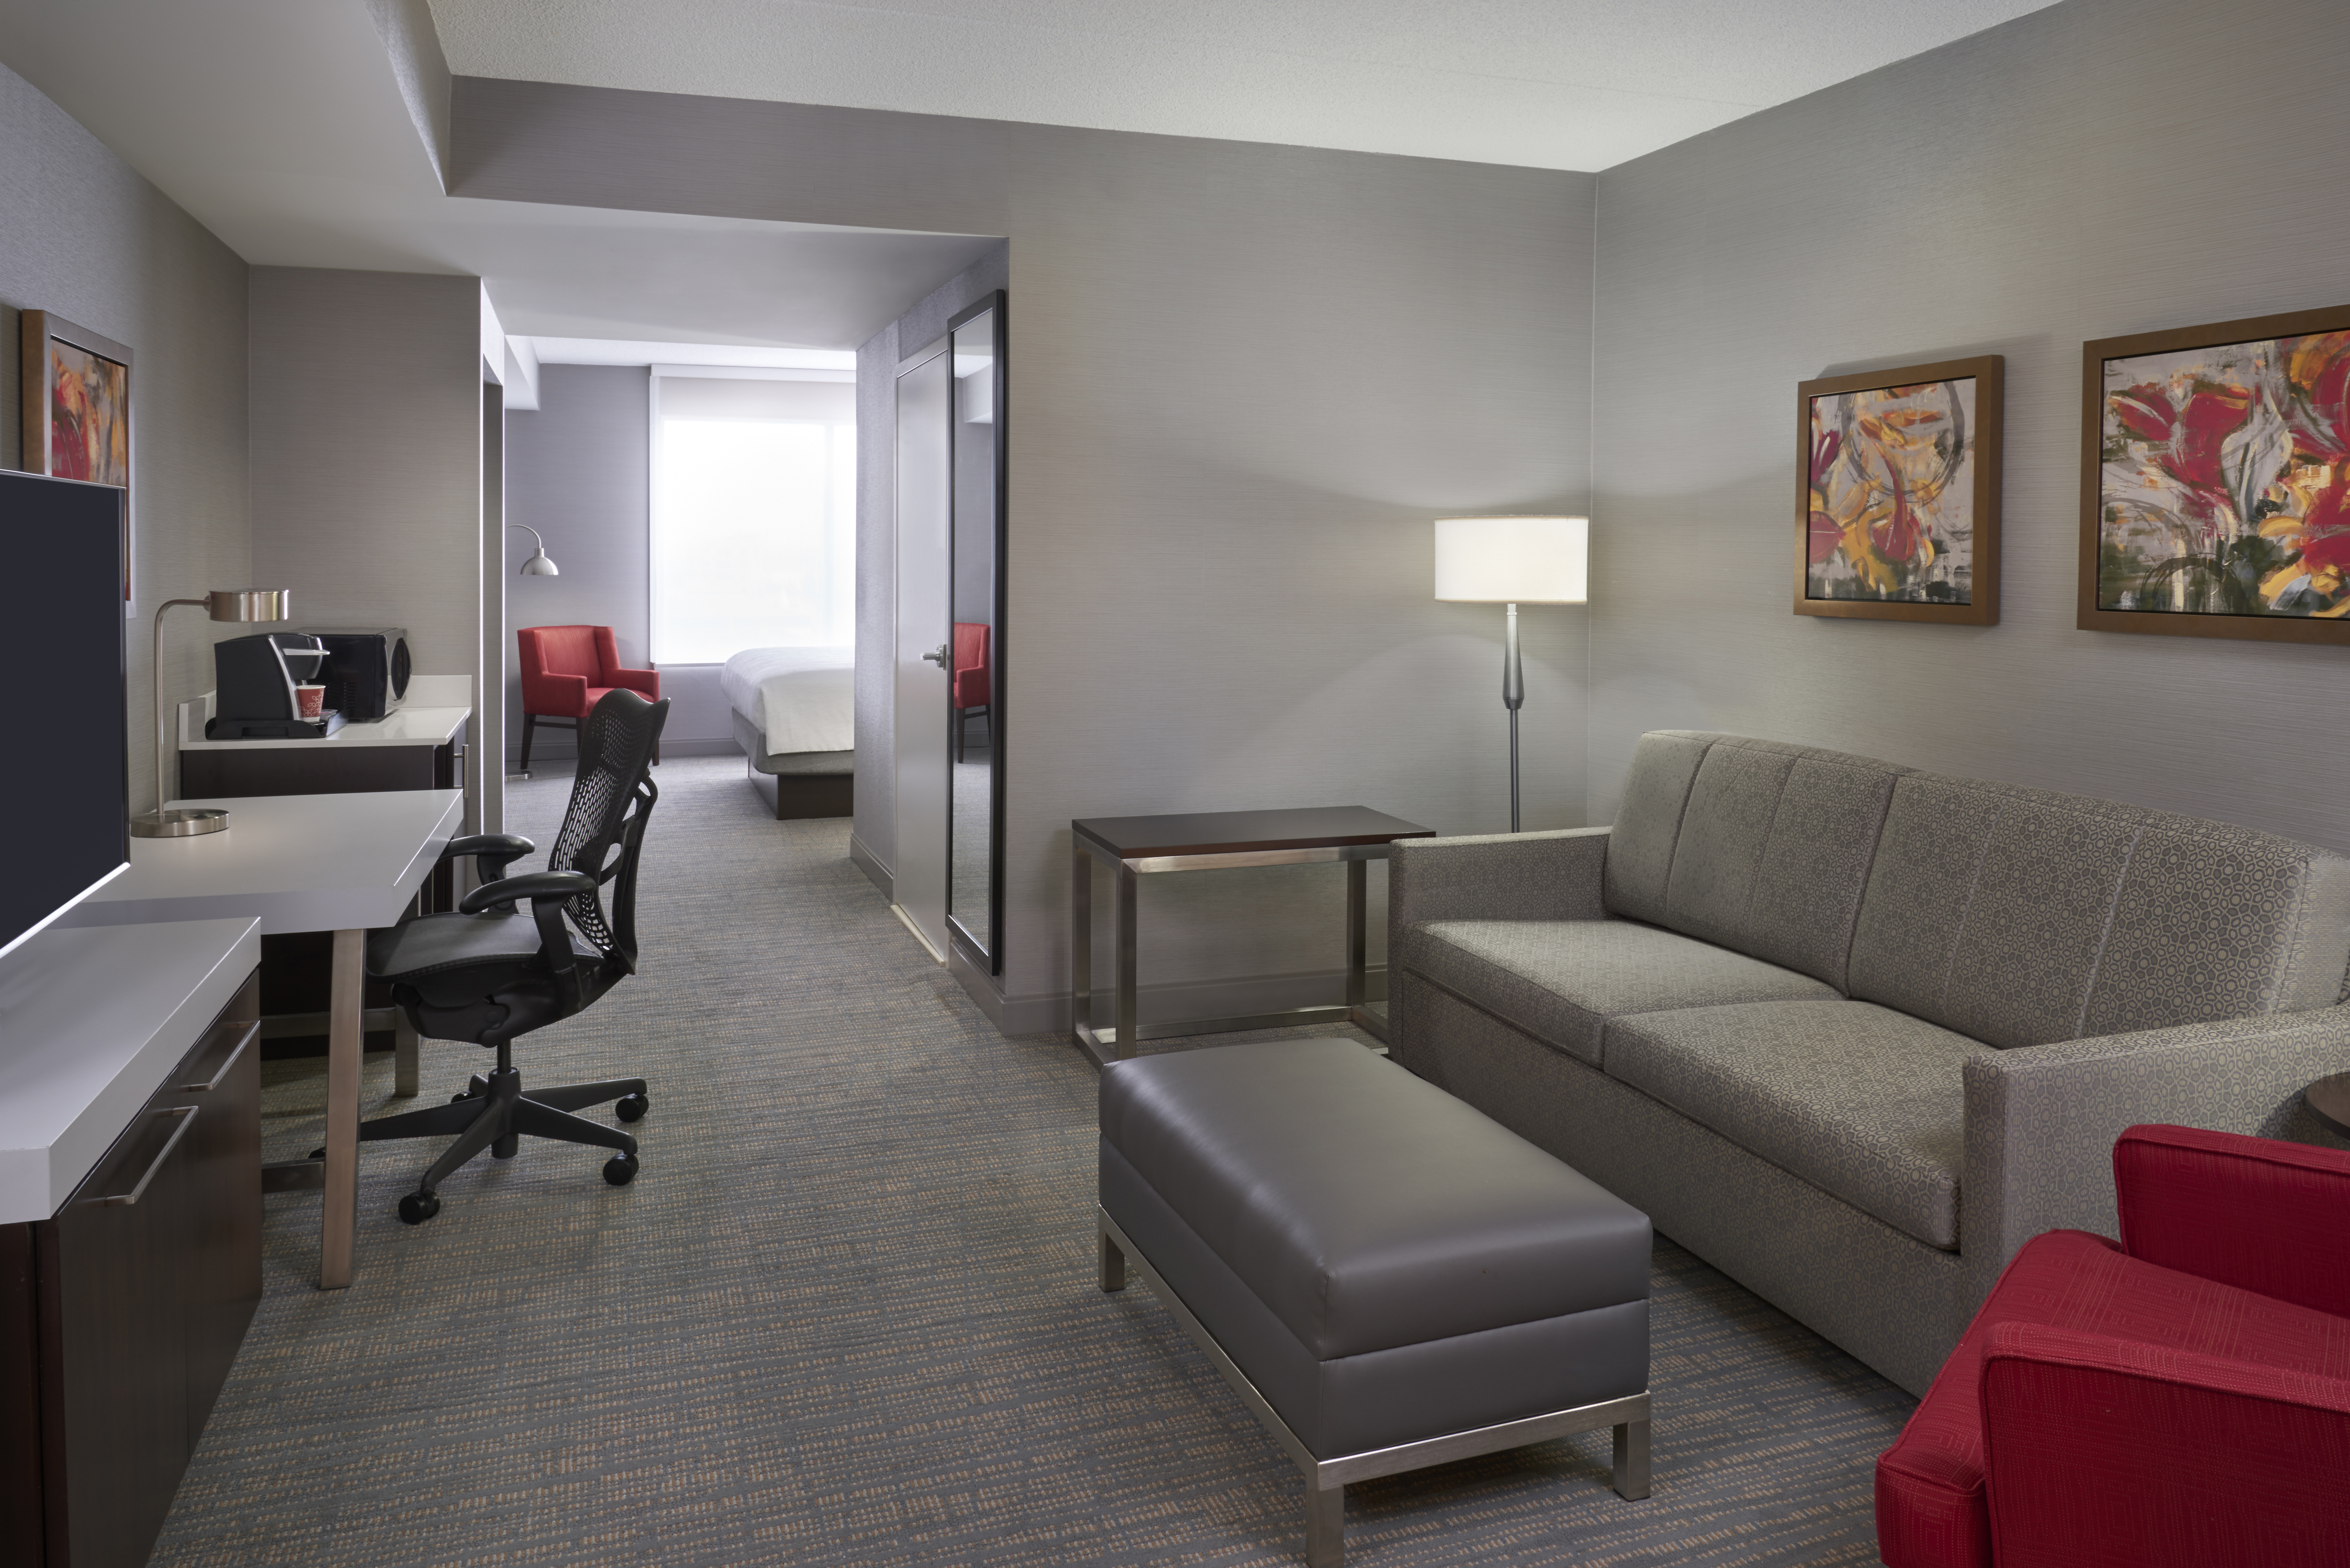 Guest Suite Lounge Area with Sofa, Footrest, Armchair, Work Desk and HDTV